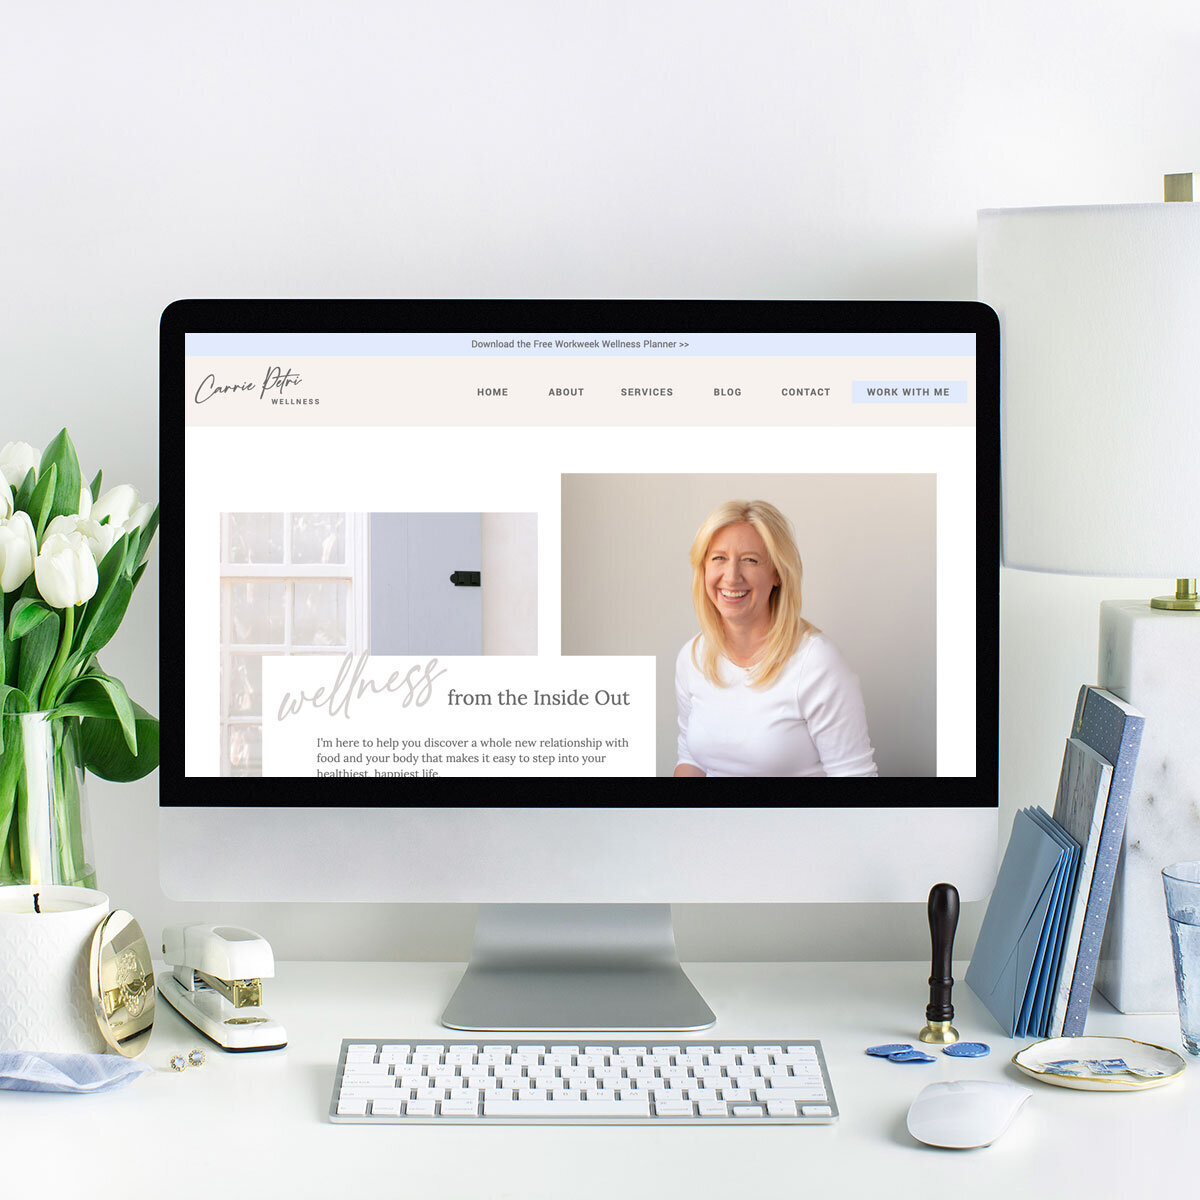 Indulge in the tranquility of this wellness retreat project, designed by me, Heather Jones, a skilled Showit Web Designer. It complements Carrie's role as a wellness consultant, setting the stage for a serene and balanced online presence.